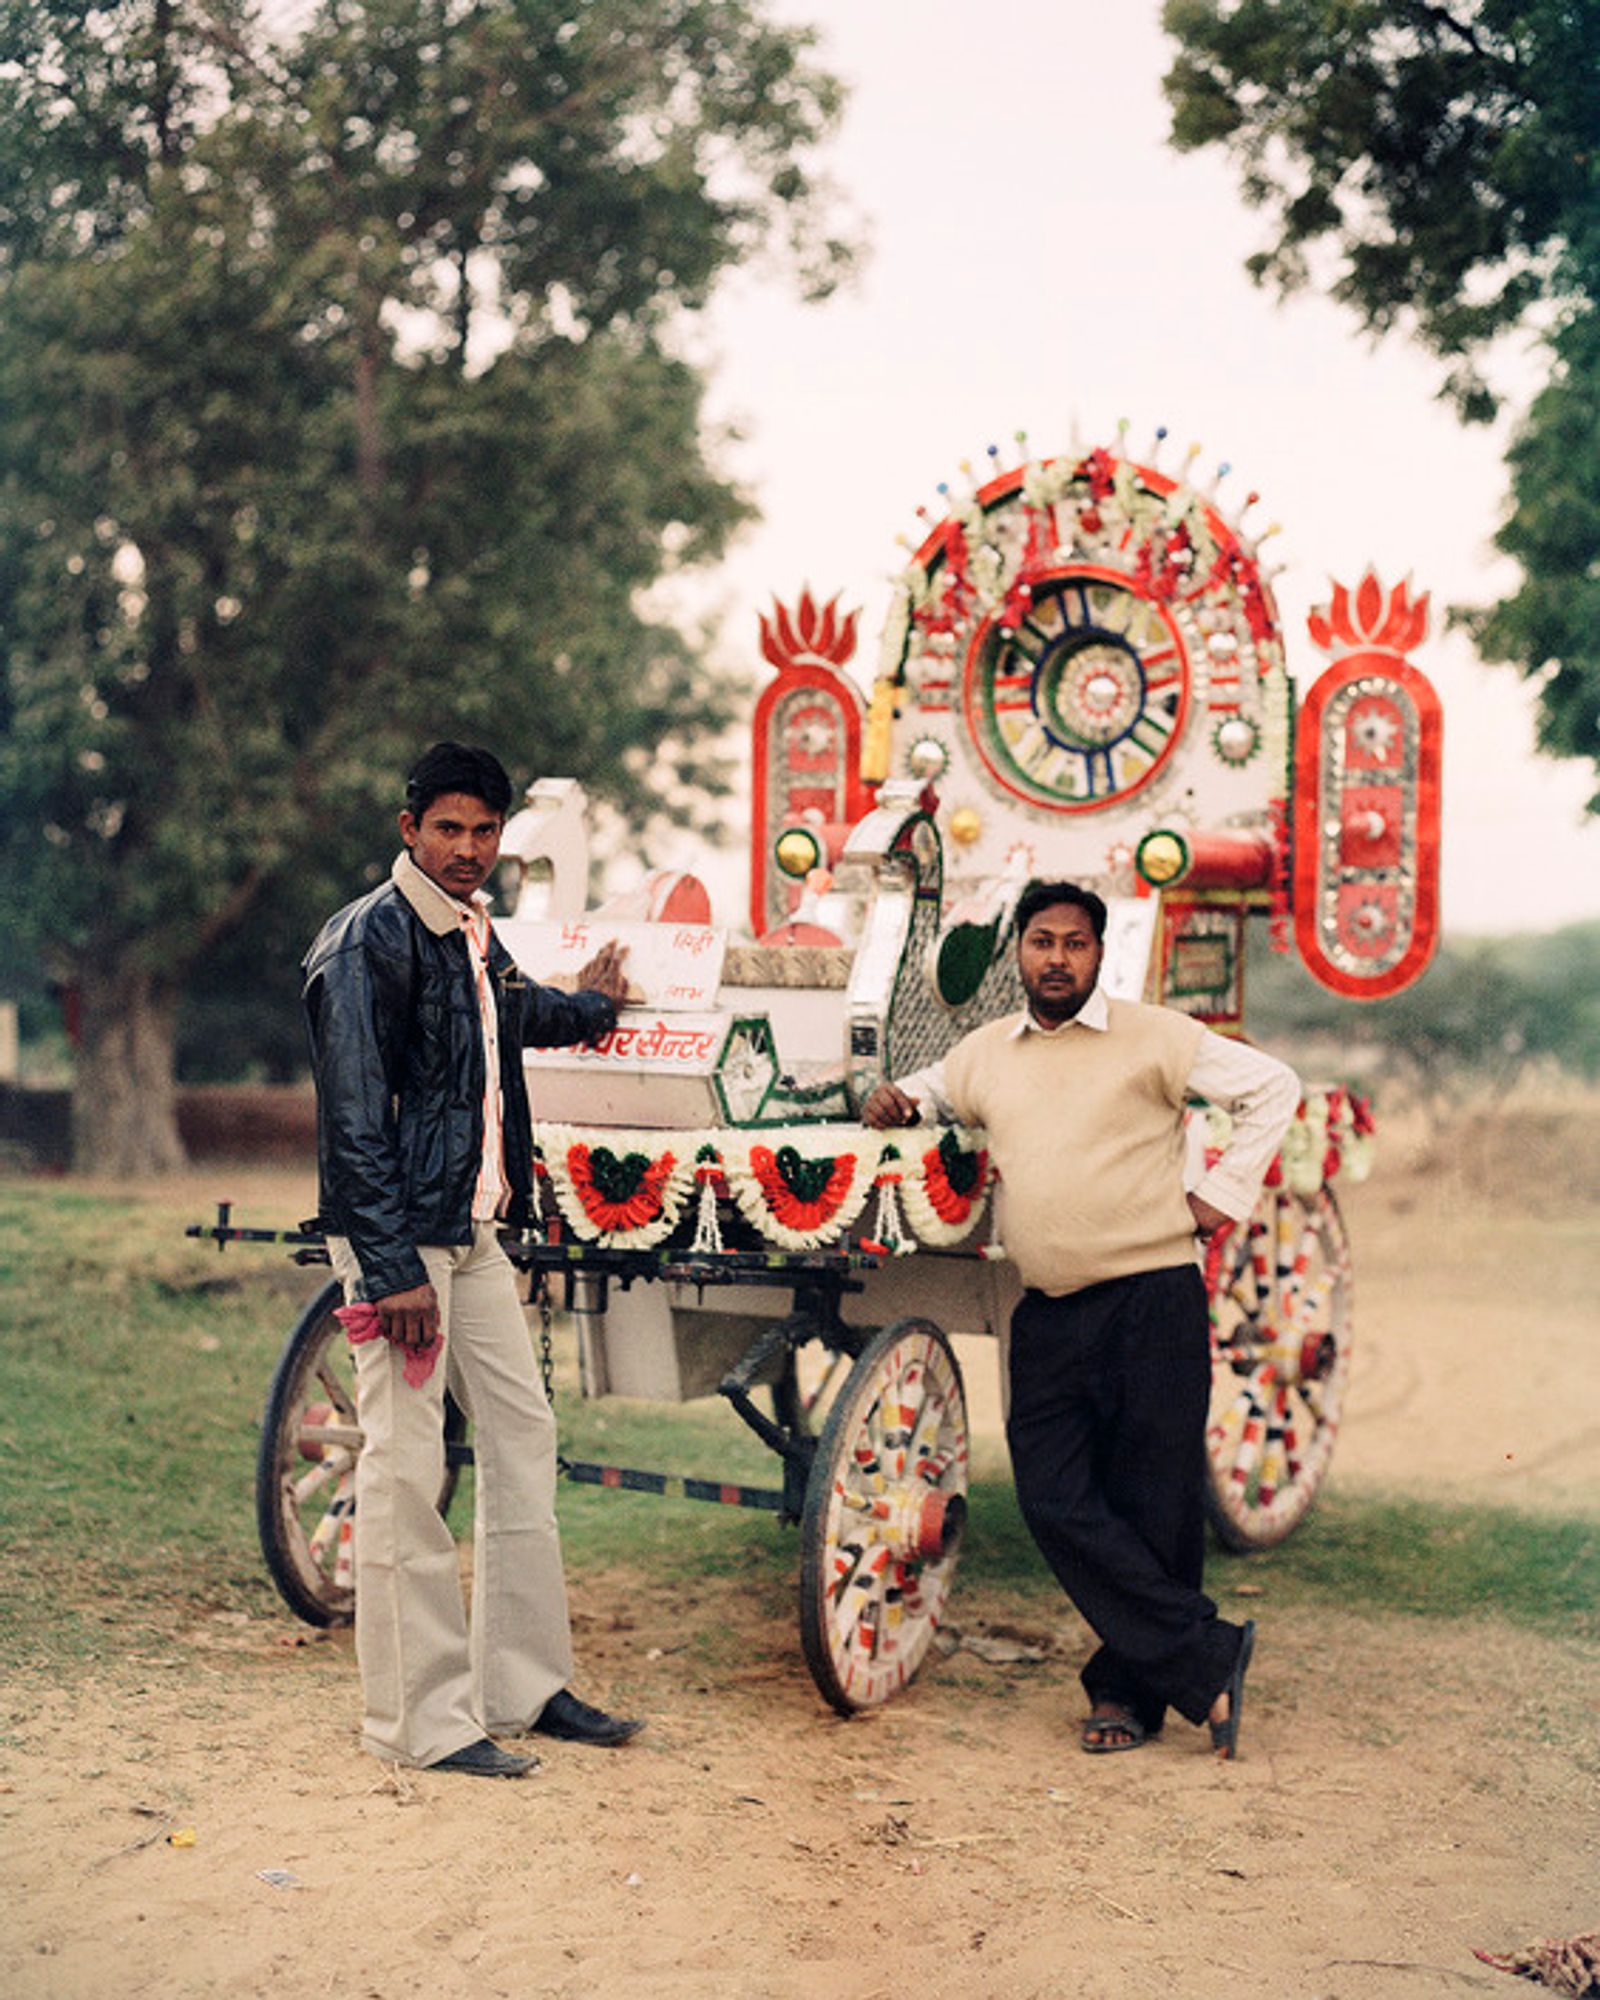 © Sebastian Forkarth - Image from the Not east, not west .. India is the best photography project